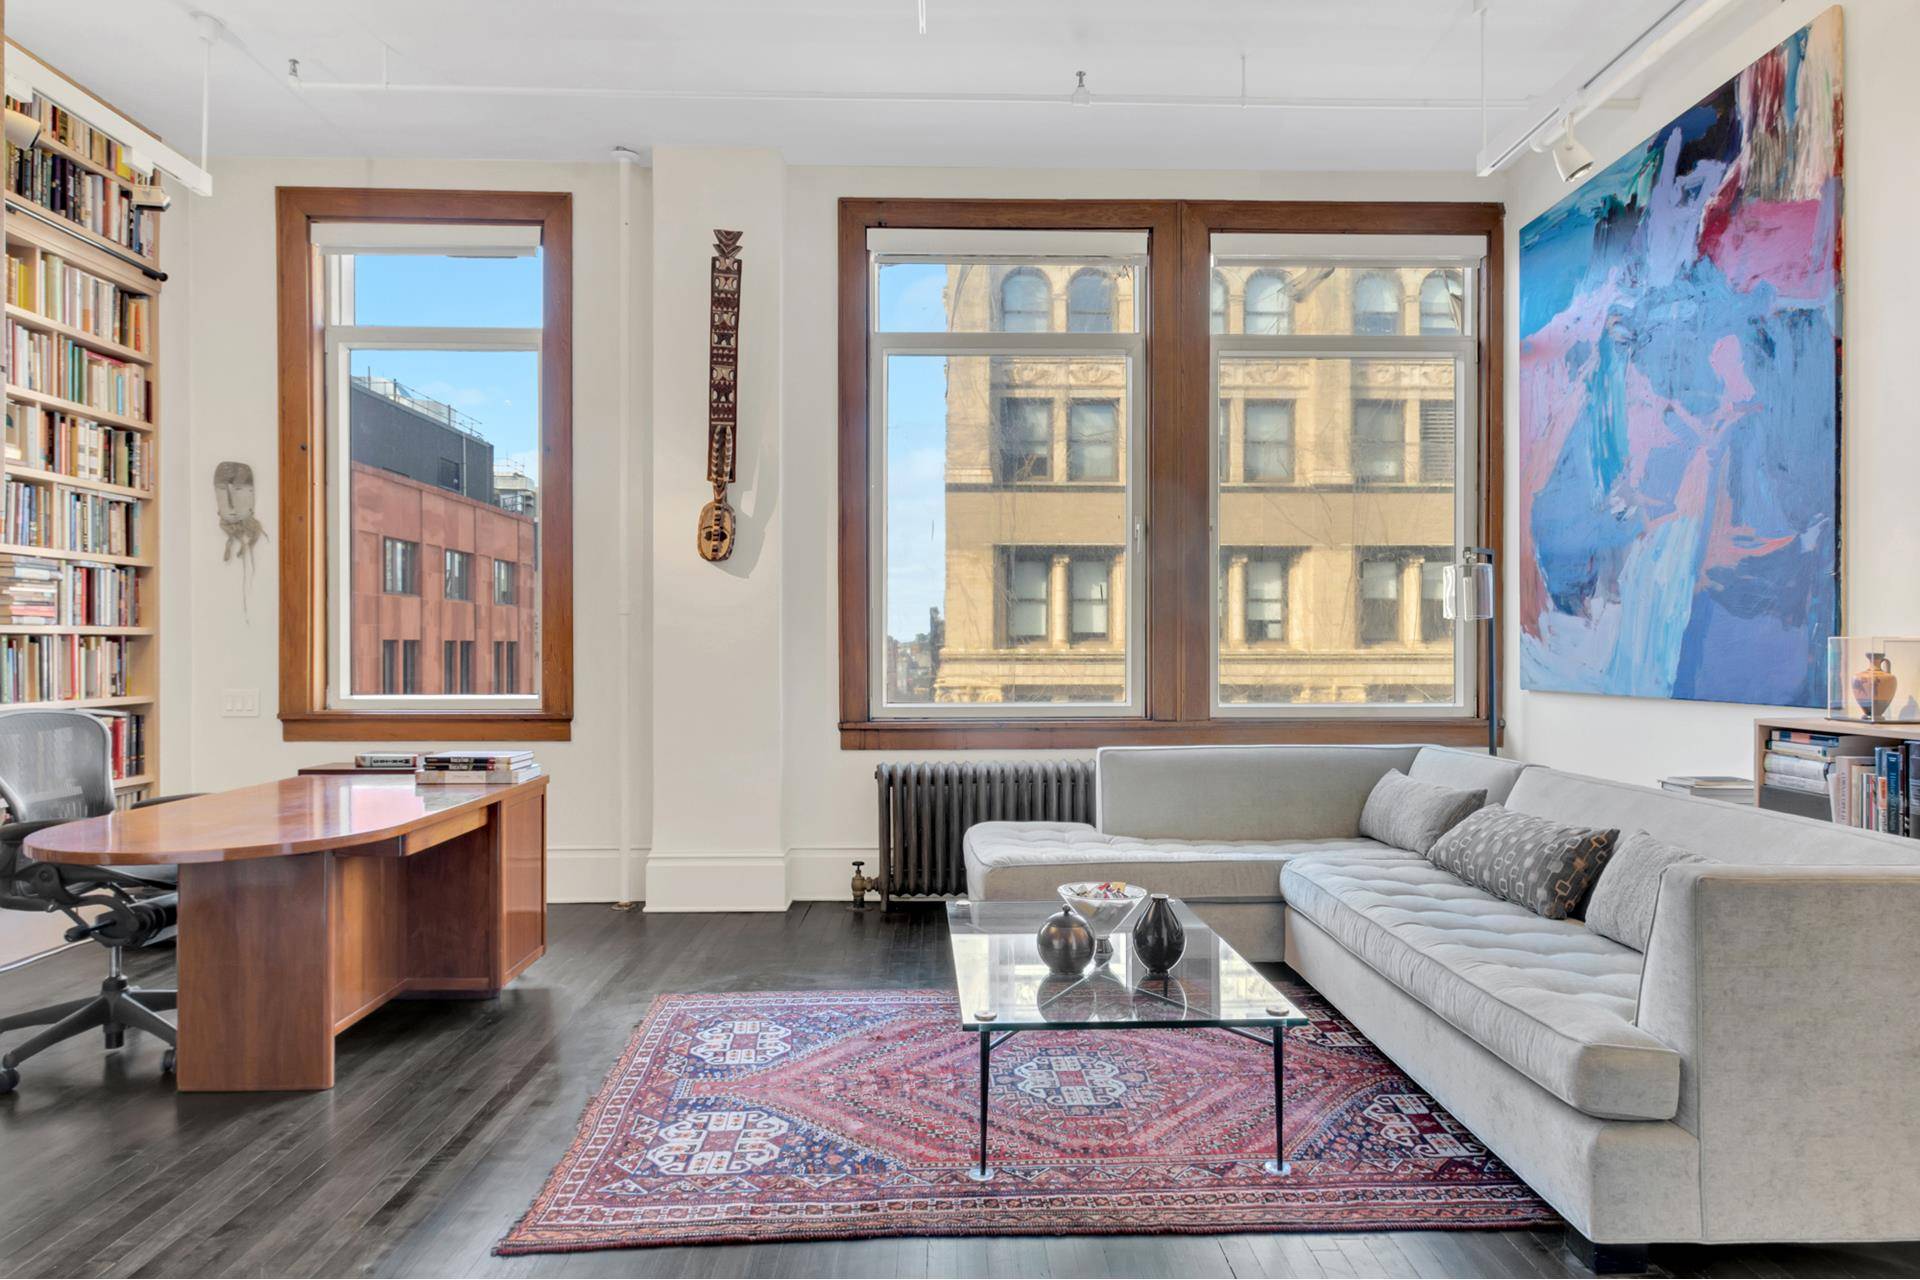 Beautiful and sustainably renovated loft apartment available at 718 Broadway, a pre war building conveniently situated on the border of Noho and Greenwich Village.